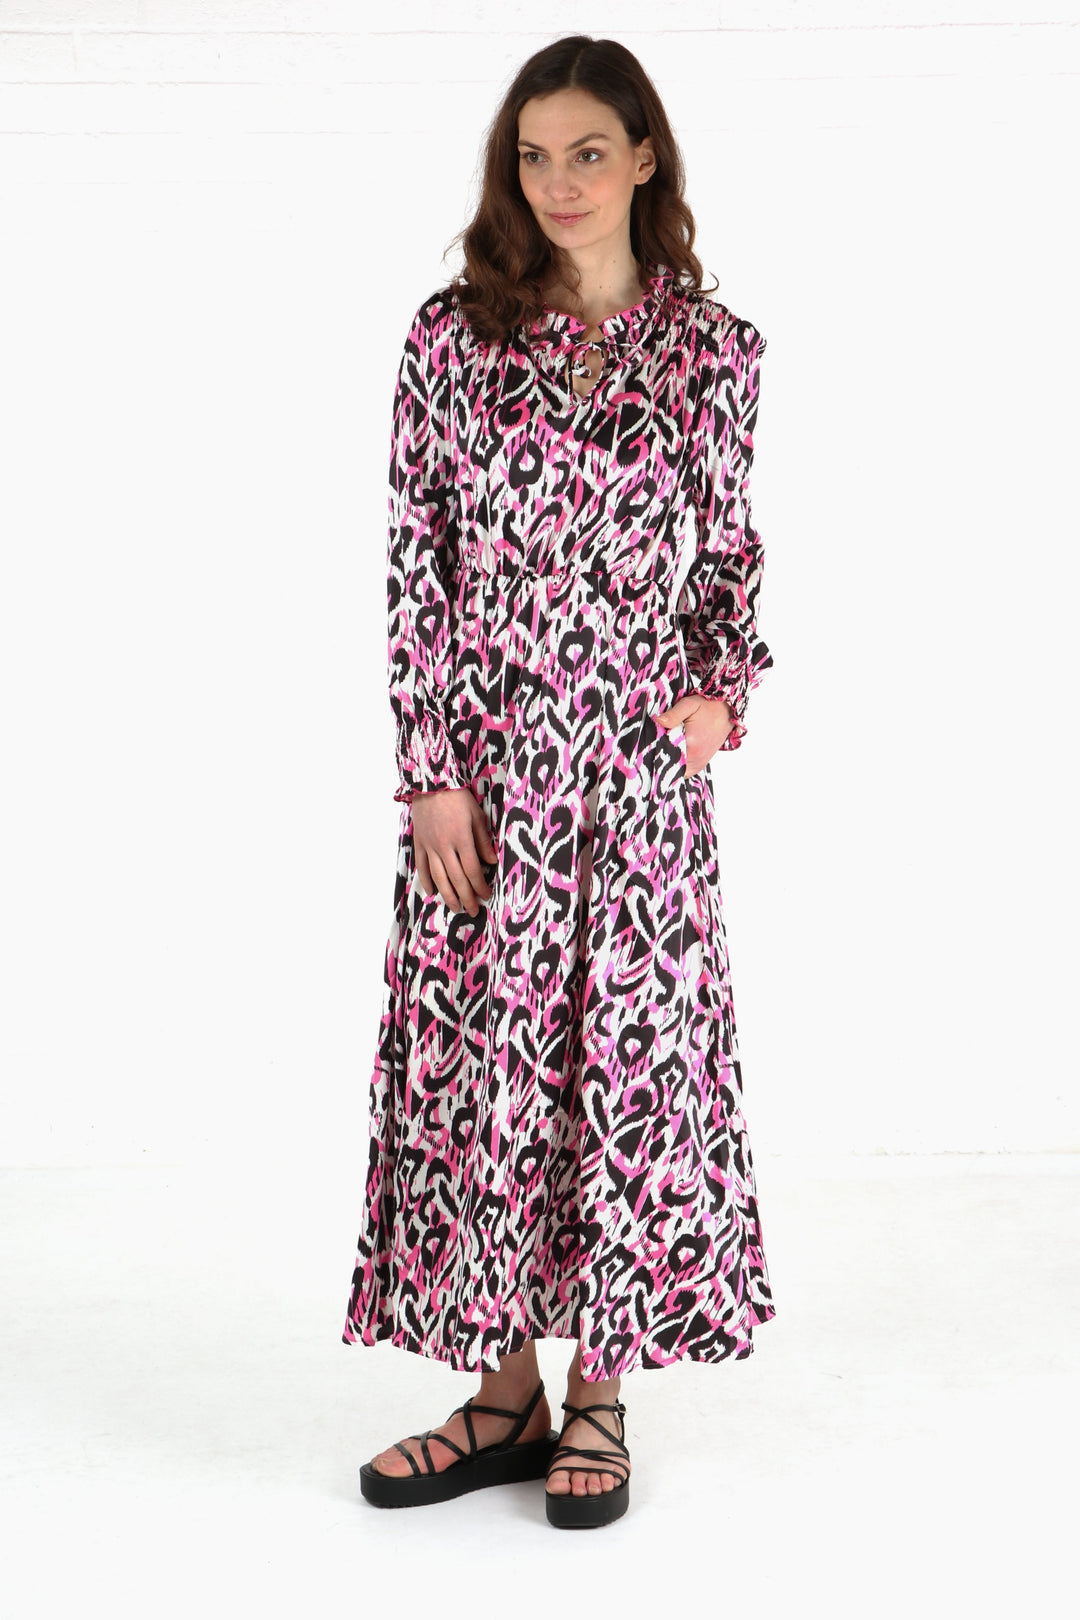 model wearing a long sleeve midi dress in an all over pink and black abstract ikat pattern, the dress has a neck tie  and shirring on the shoulders and cuffs